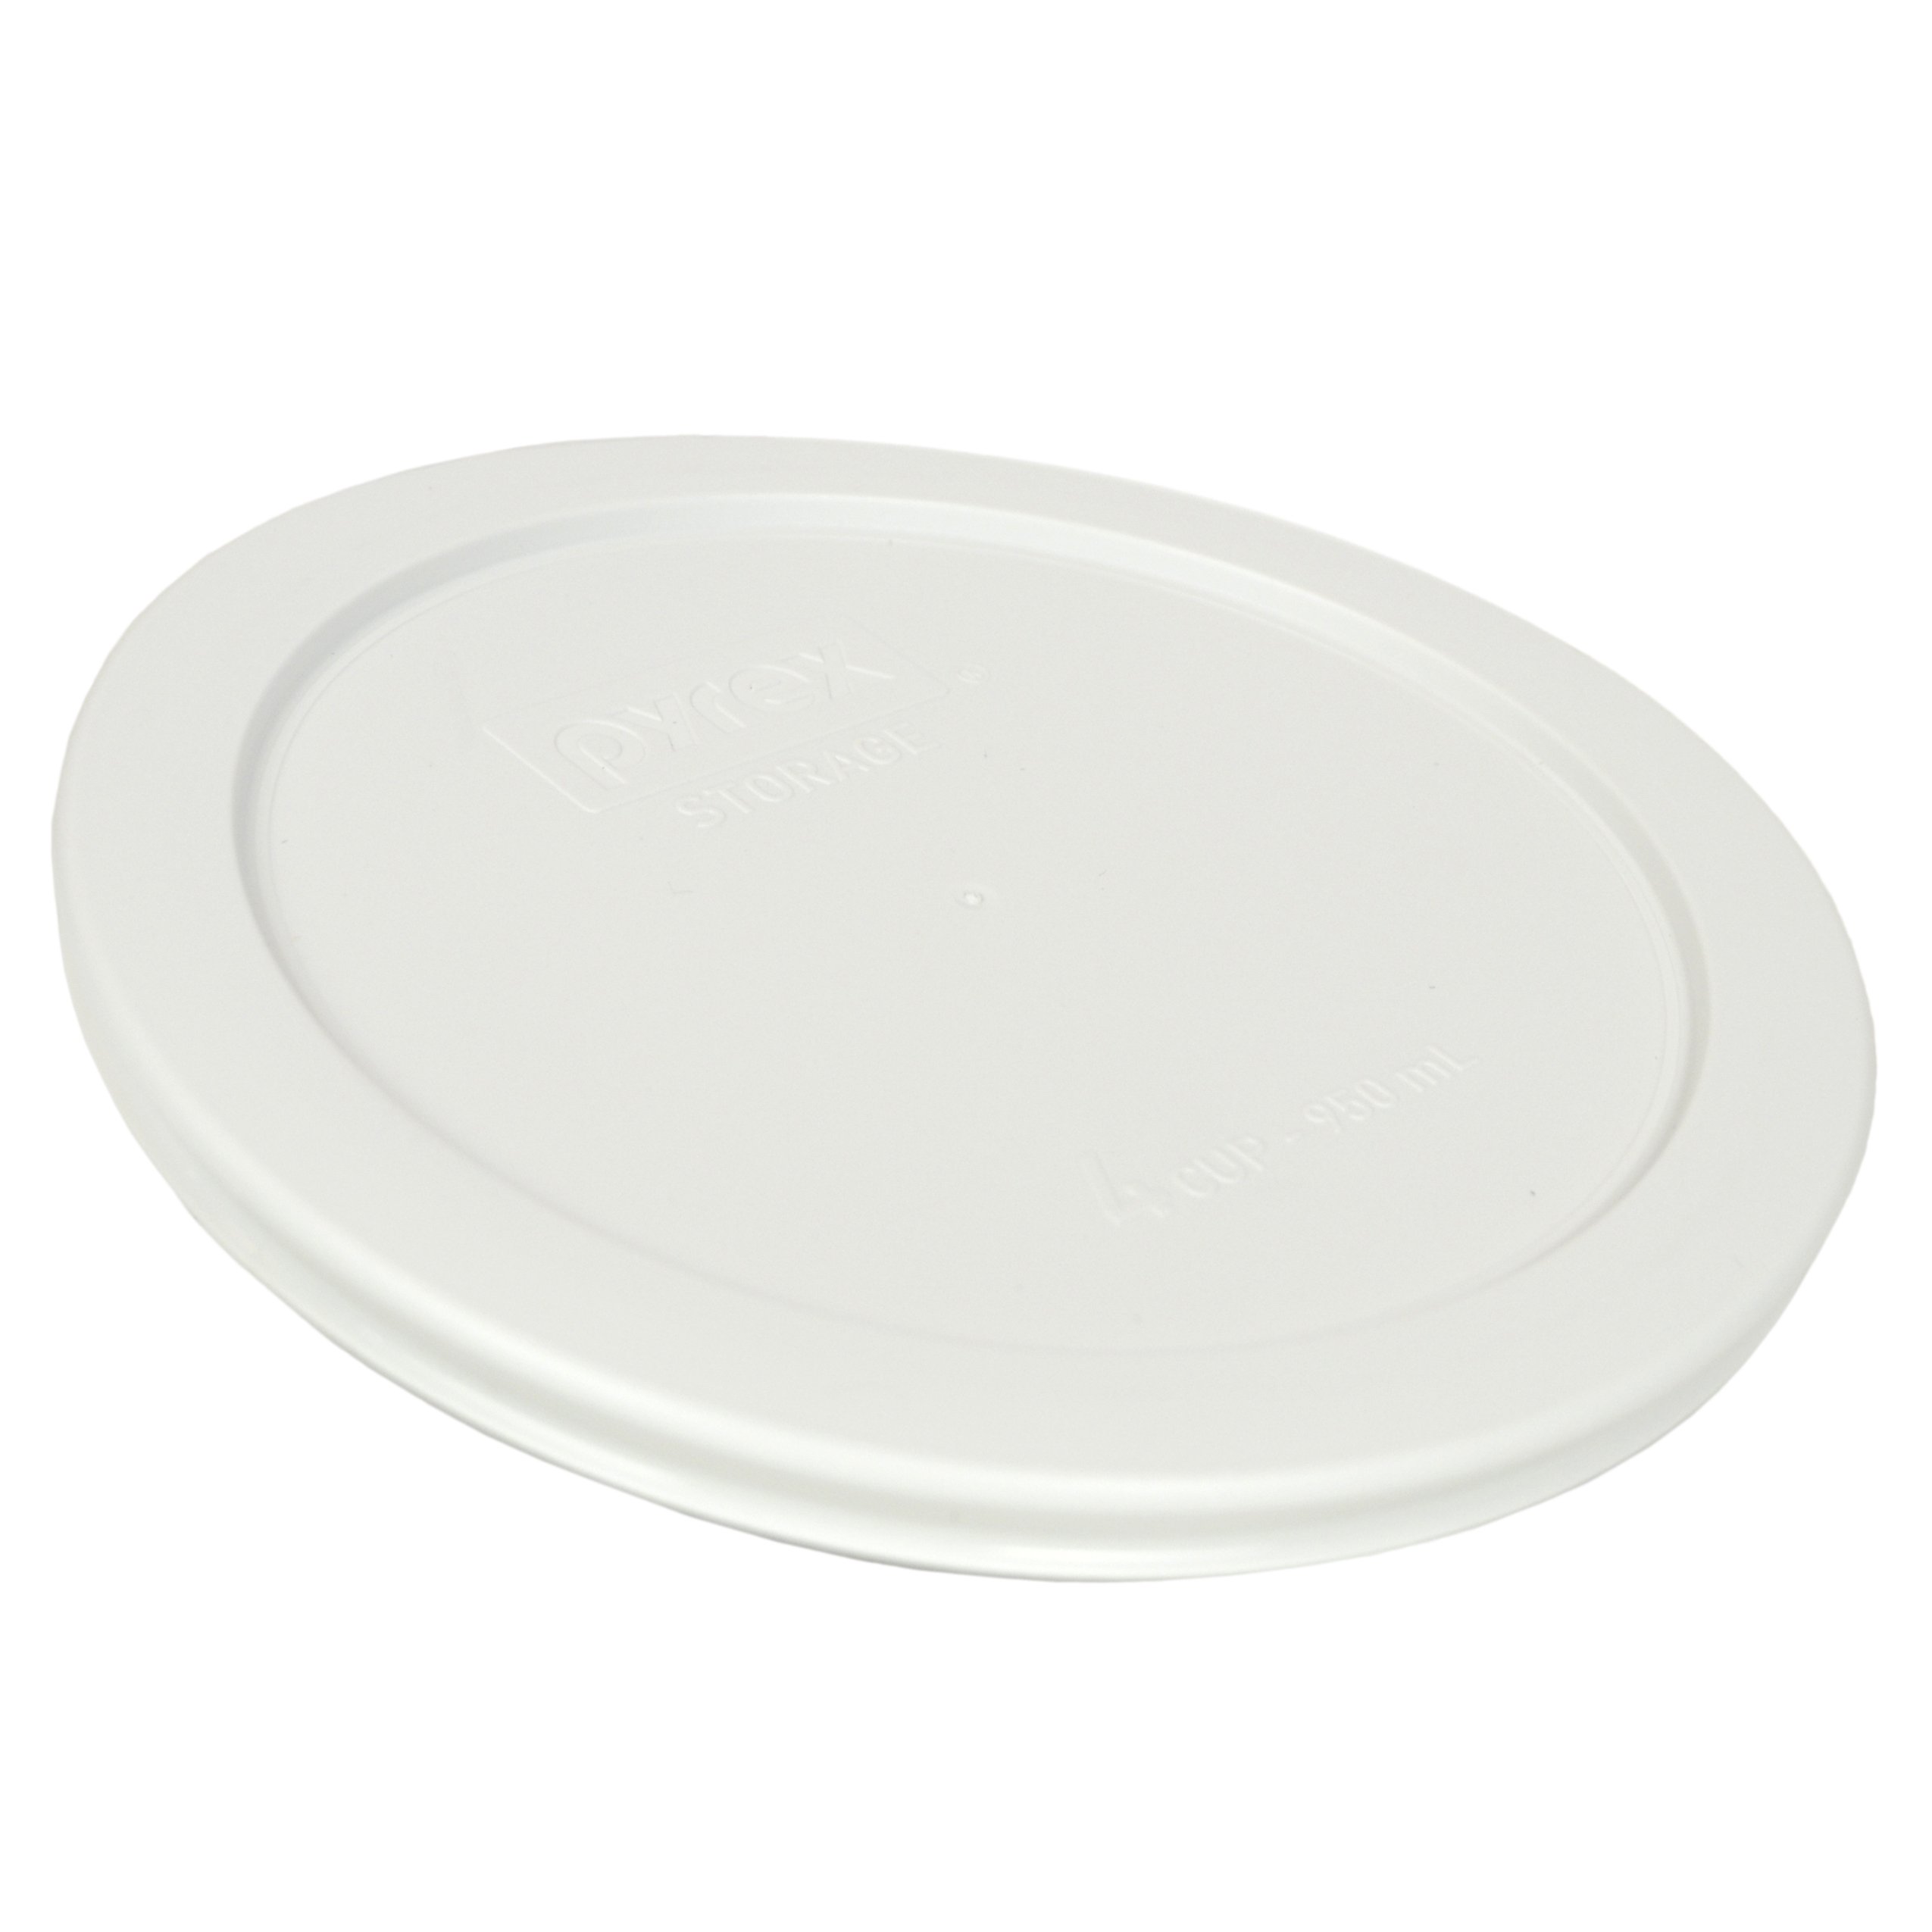 Pyrex 7201-PC Round White 4 Cup Plastic Storage Lid, Made in USA - 6 Pack